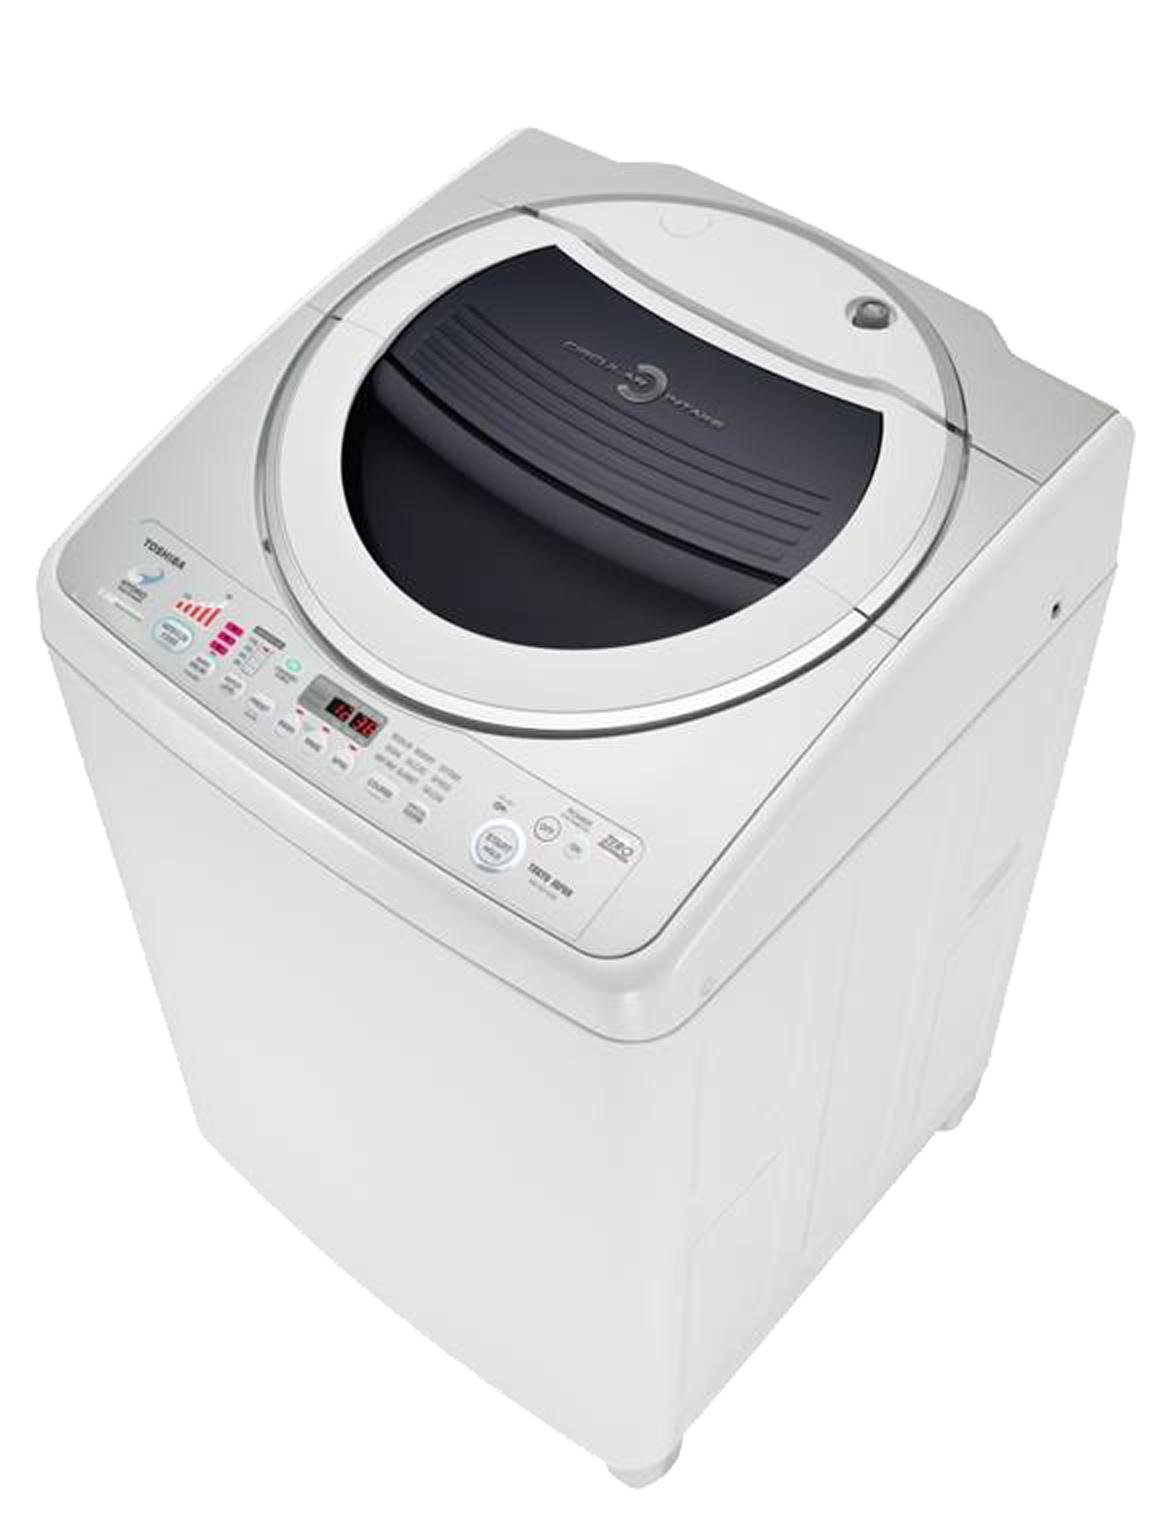 Toshiba AW-B1100 Top Load Washing for 220-240 Volt 50 Hz